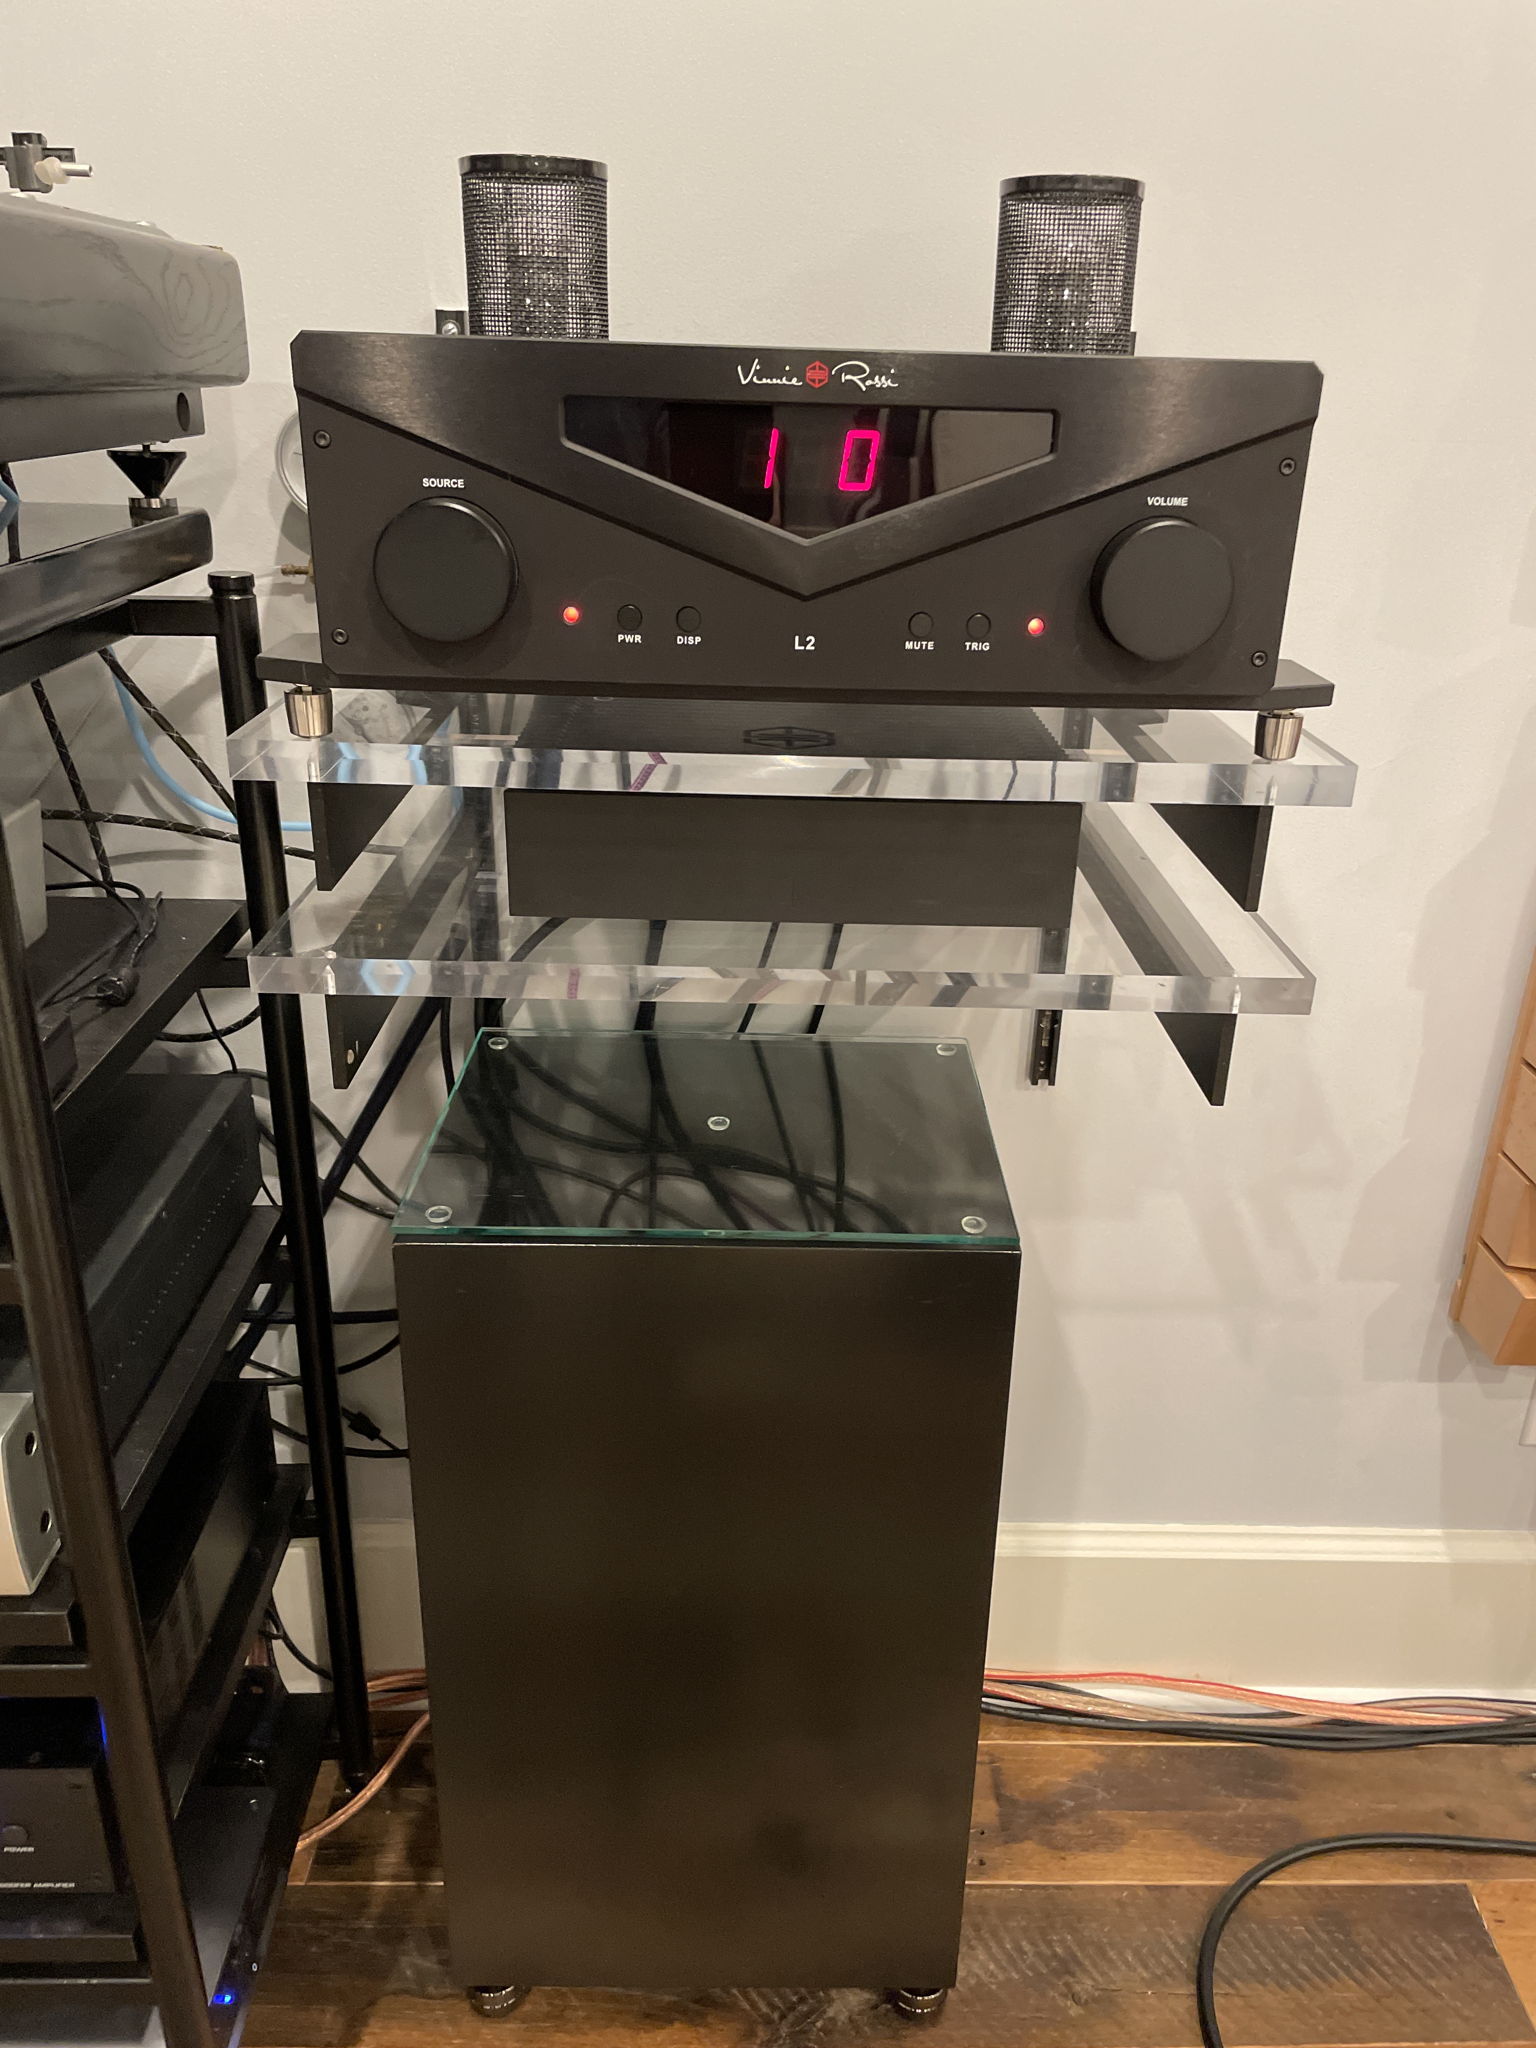 Vinnie Rossi L2 Signature DHT preamp with Takatsuki 300Bs and DAC module, Roon Nucleus Plus and one of four Swarm subs 